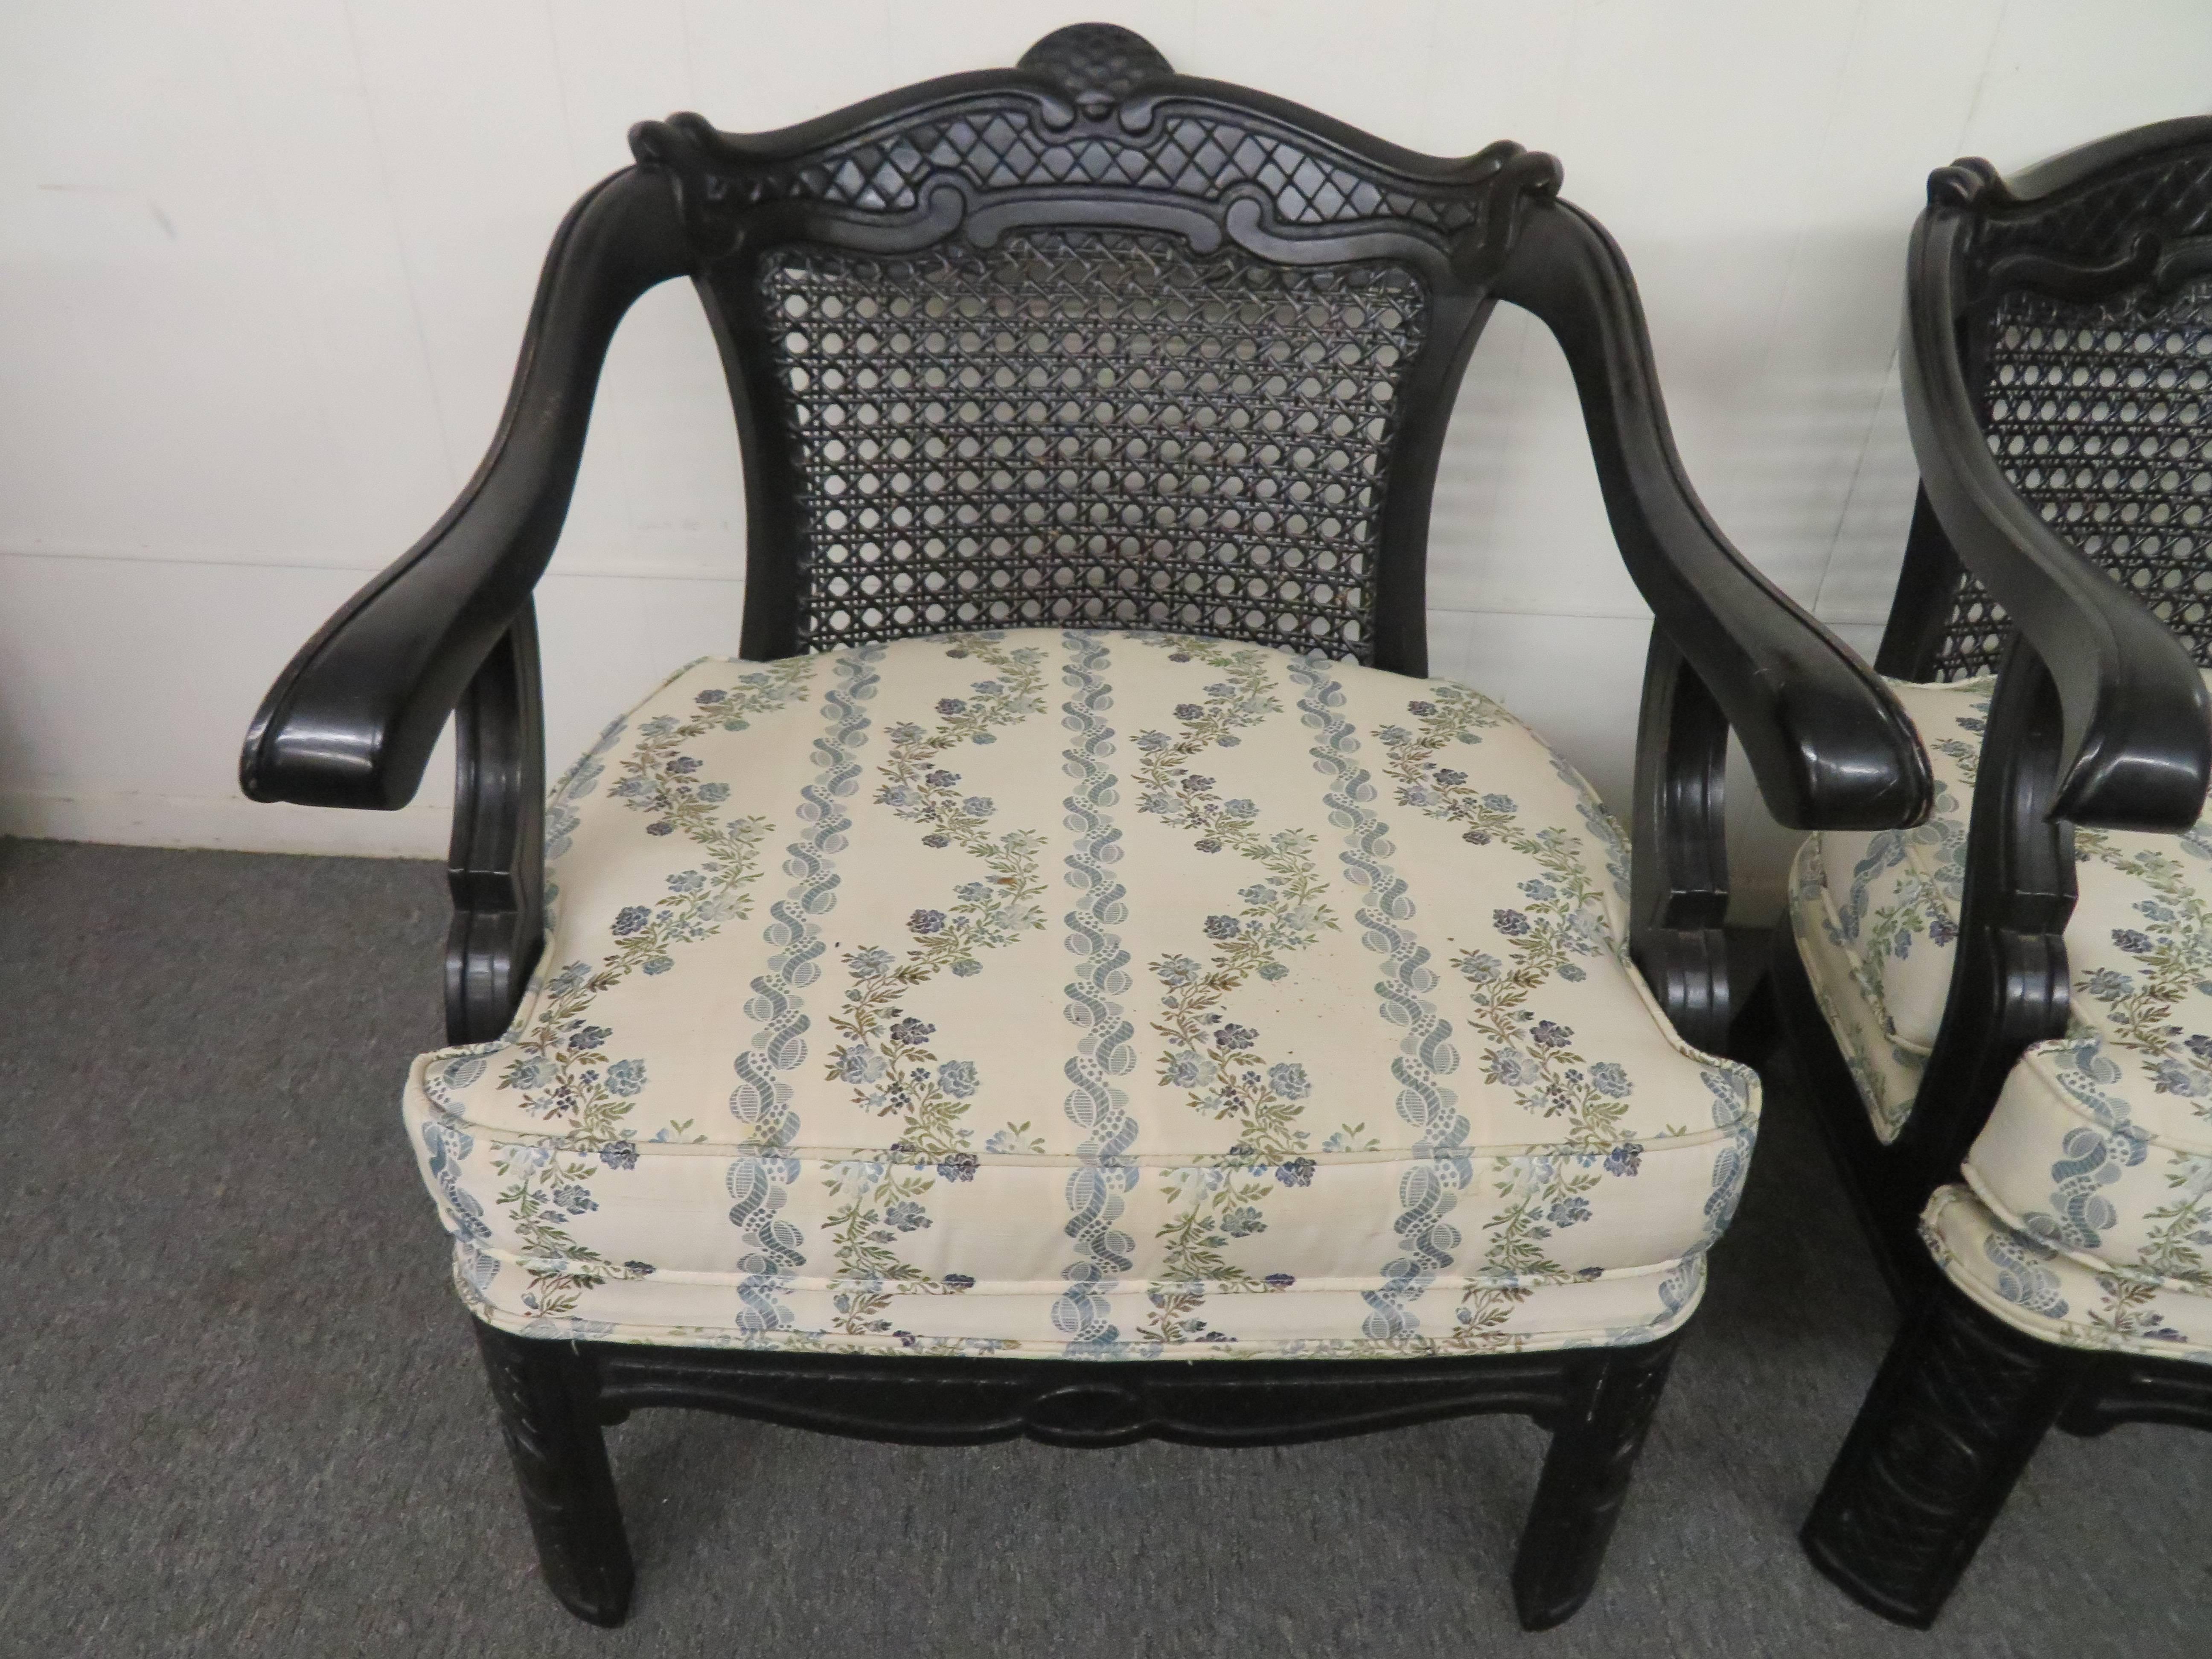 Lovely large-scale pair of chinoiserie style arm chairs with caned backs. We love the over-size wide seats and black lacquered finish. Great as is but you may like to give them a fresh new look with a colored lacquer finish and new upholstery.